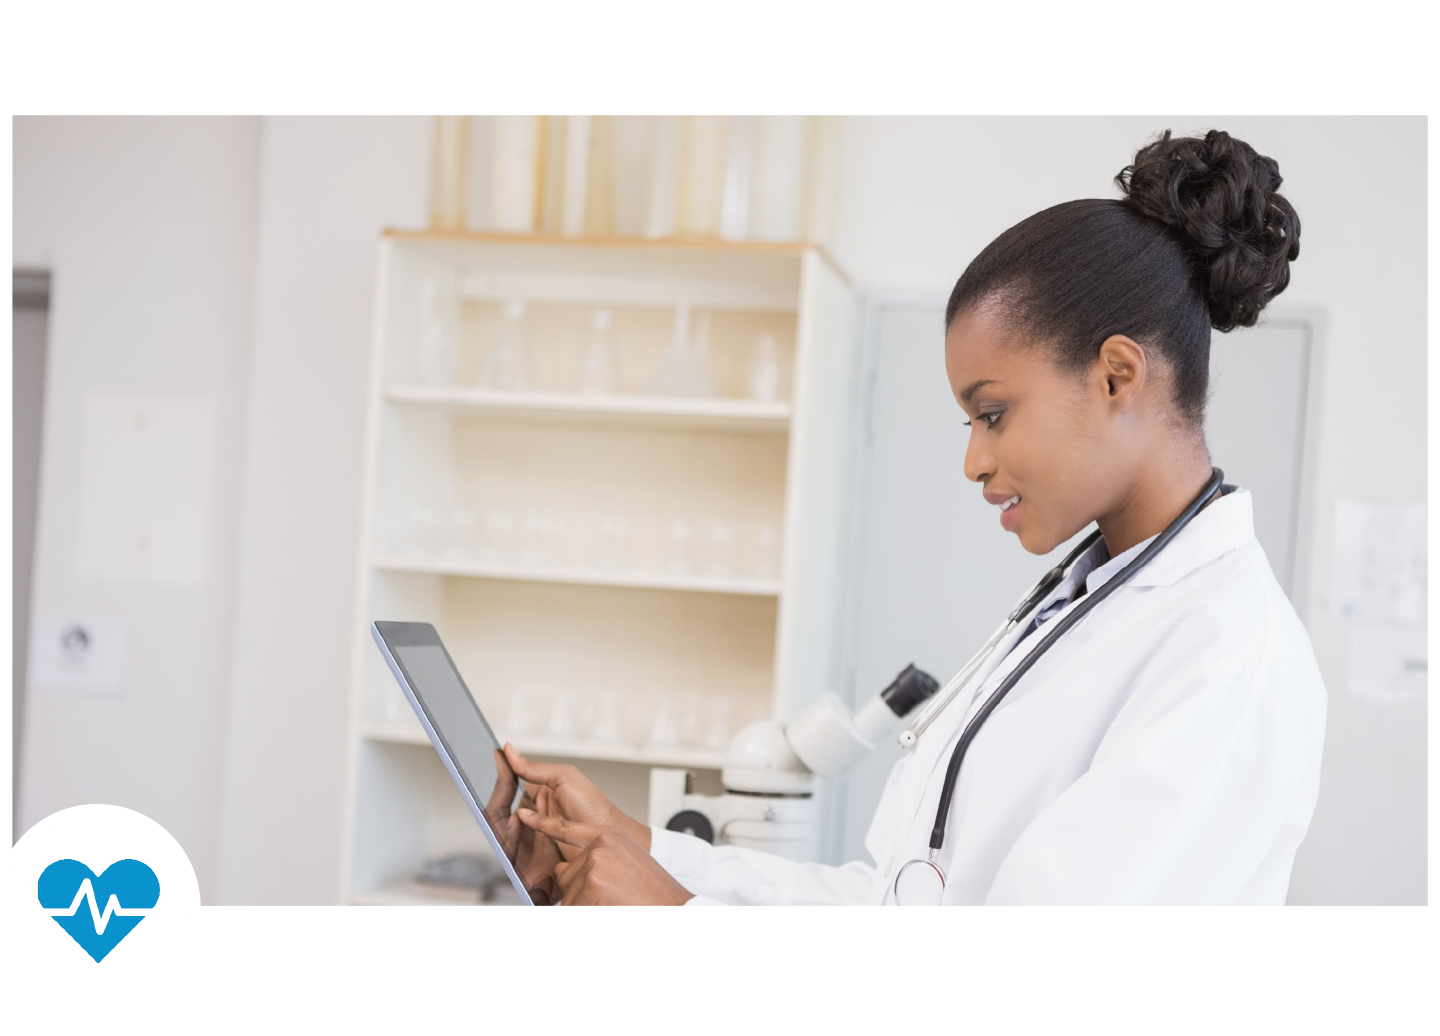 Healthcare Worker Holding Tablet in Doctor's Office